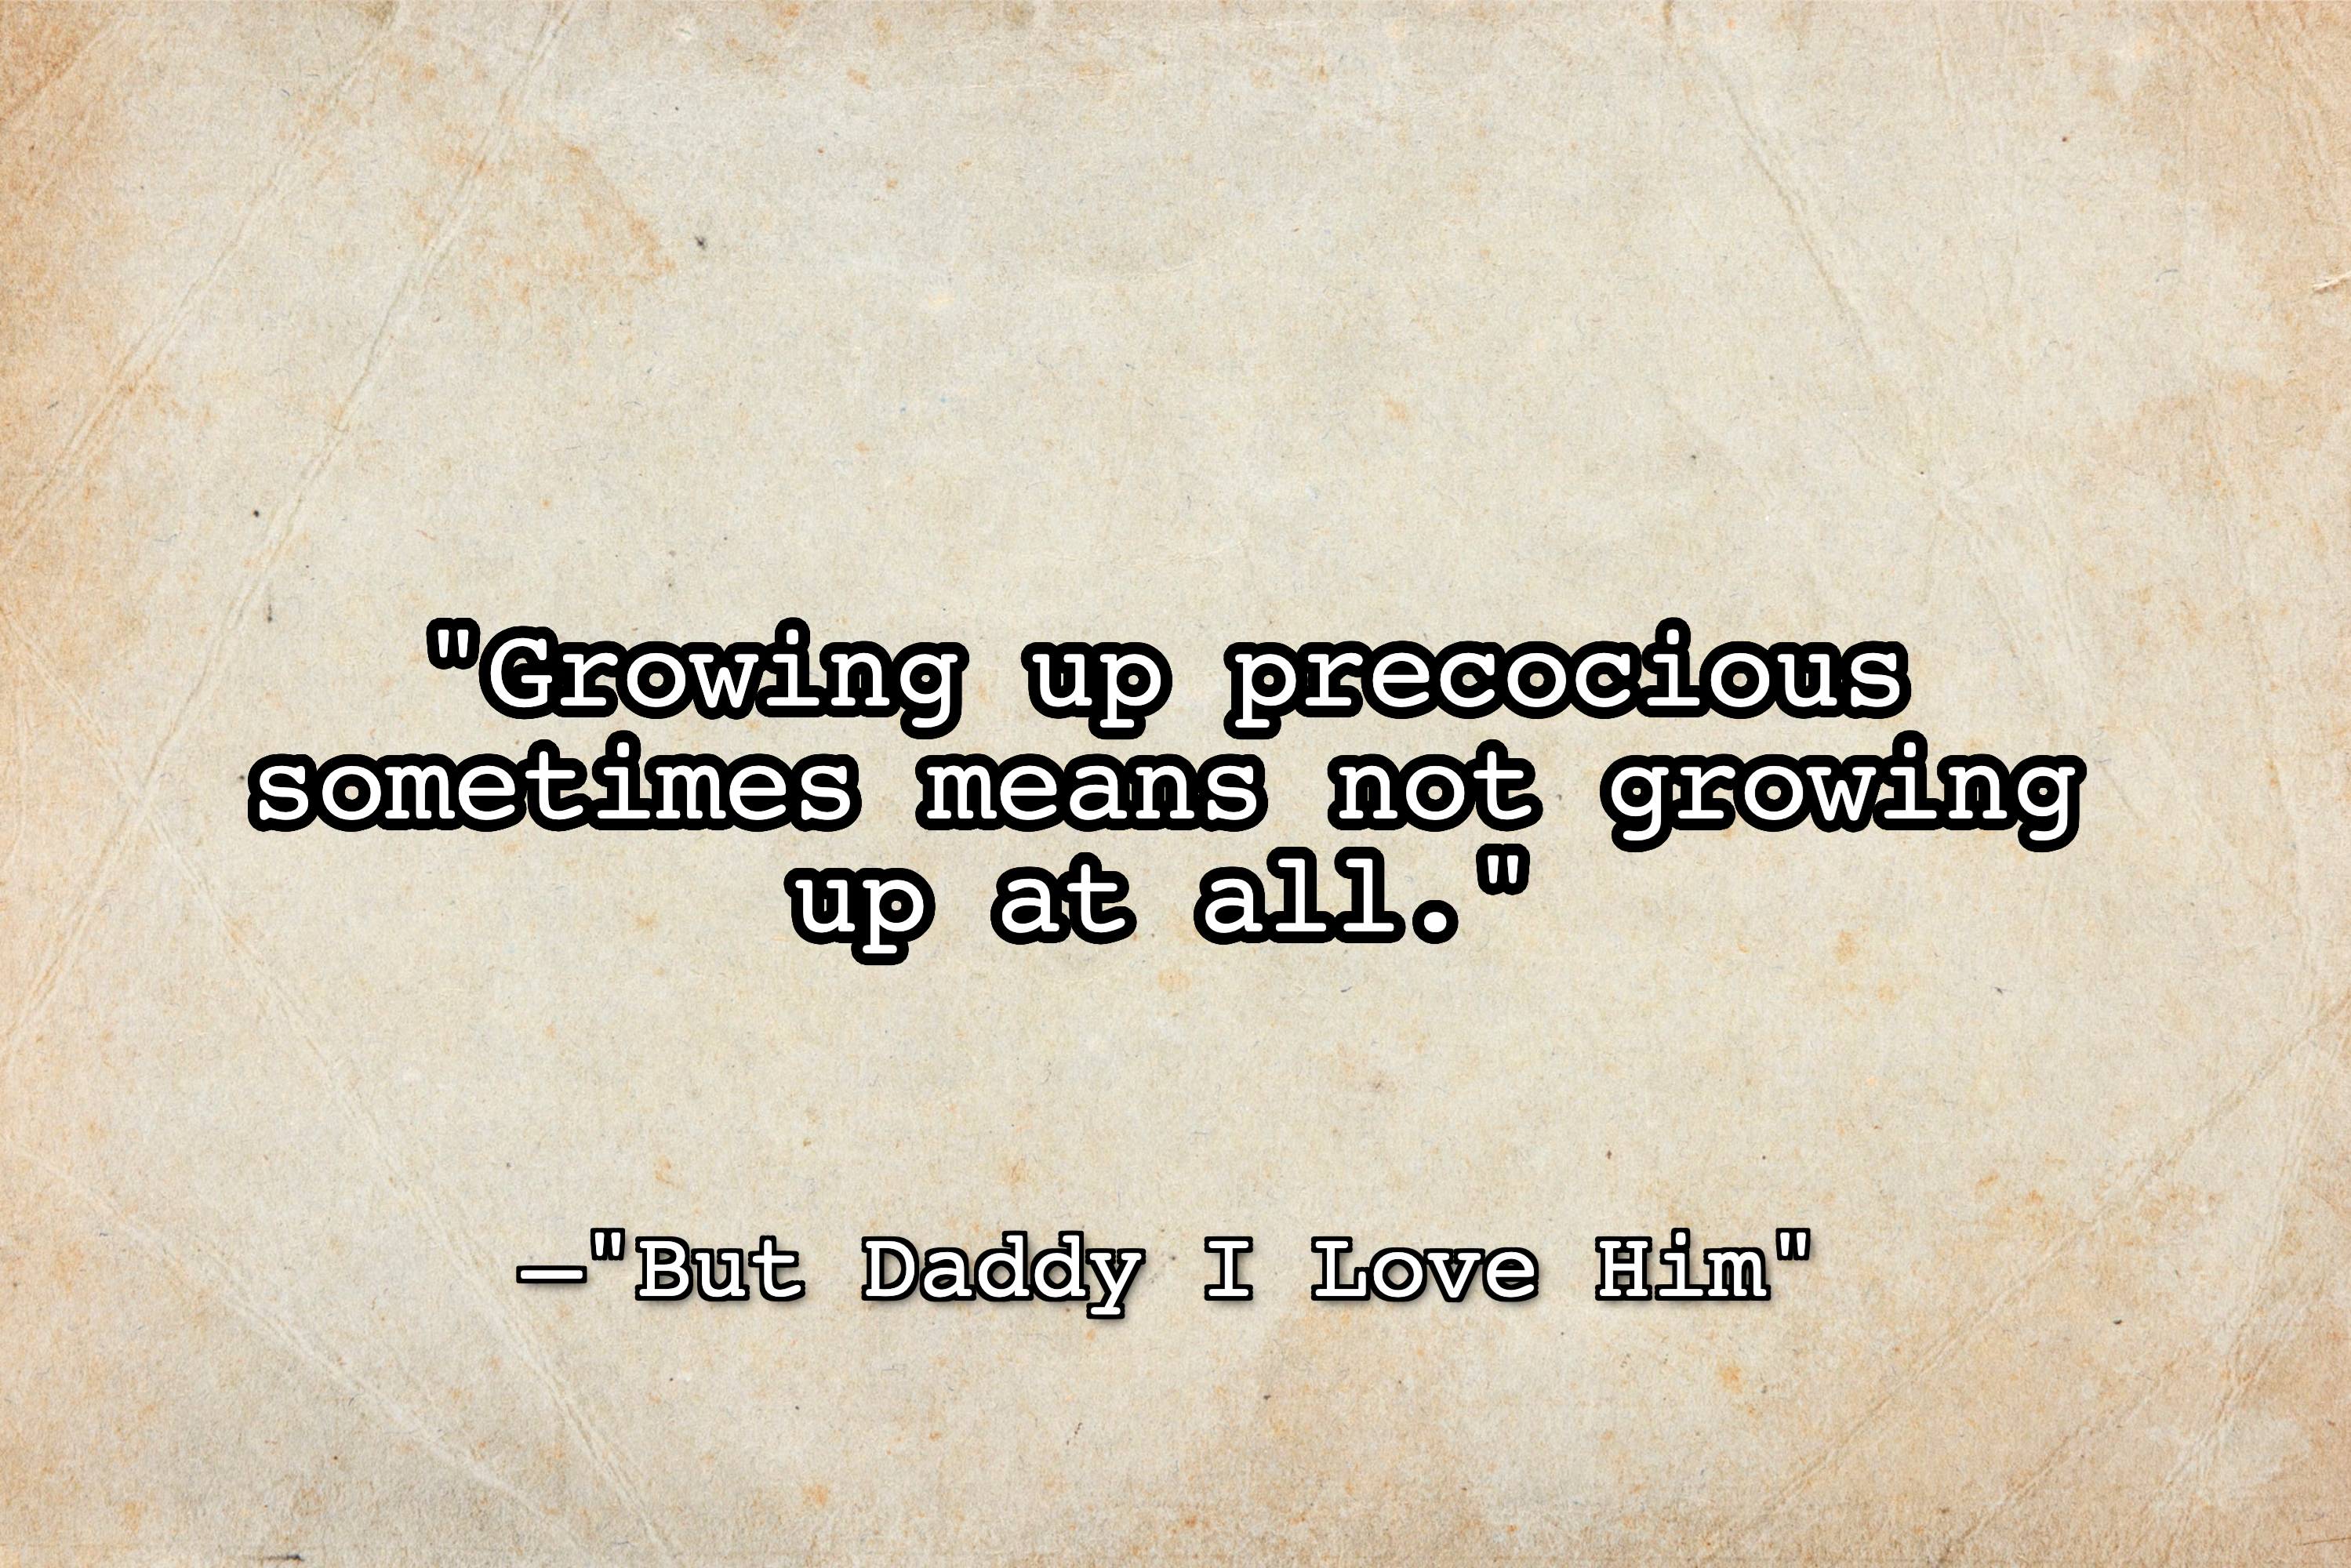 The image is a texture or background with the text: &quot;Growing up precocious sometimes means not growing up at all&quot;